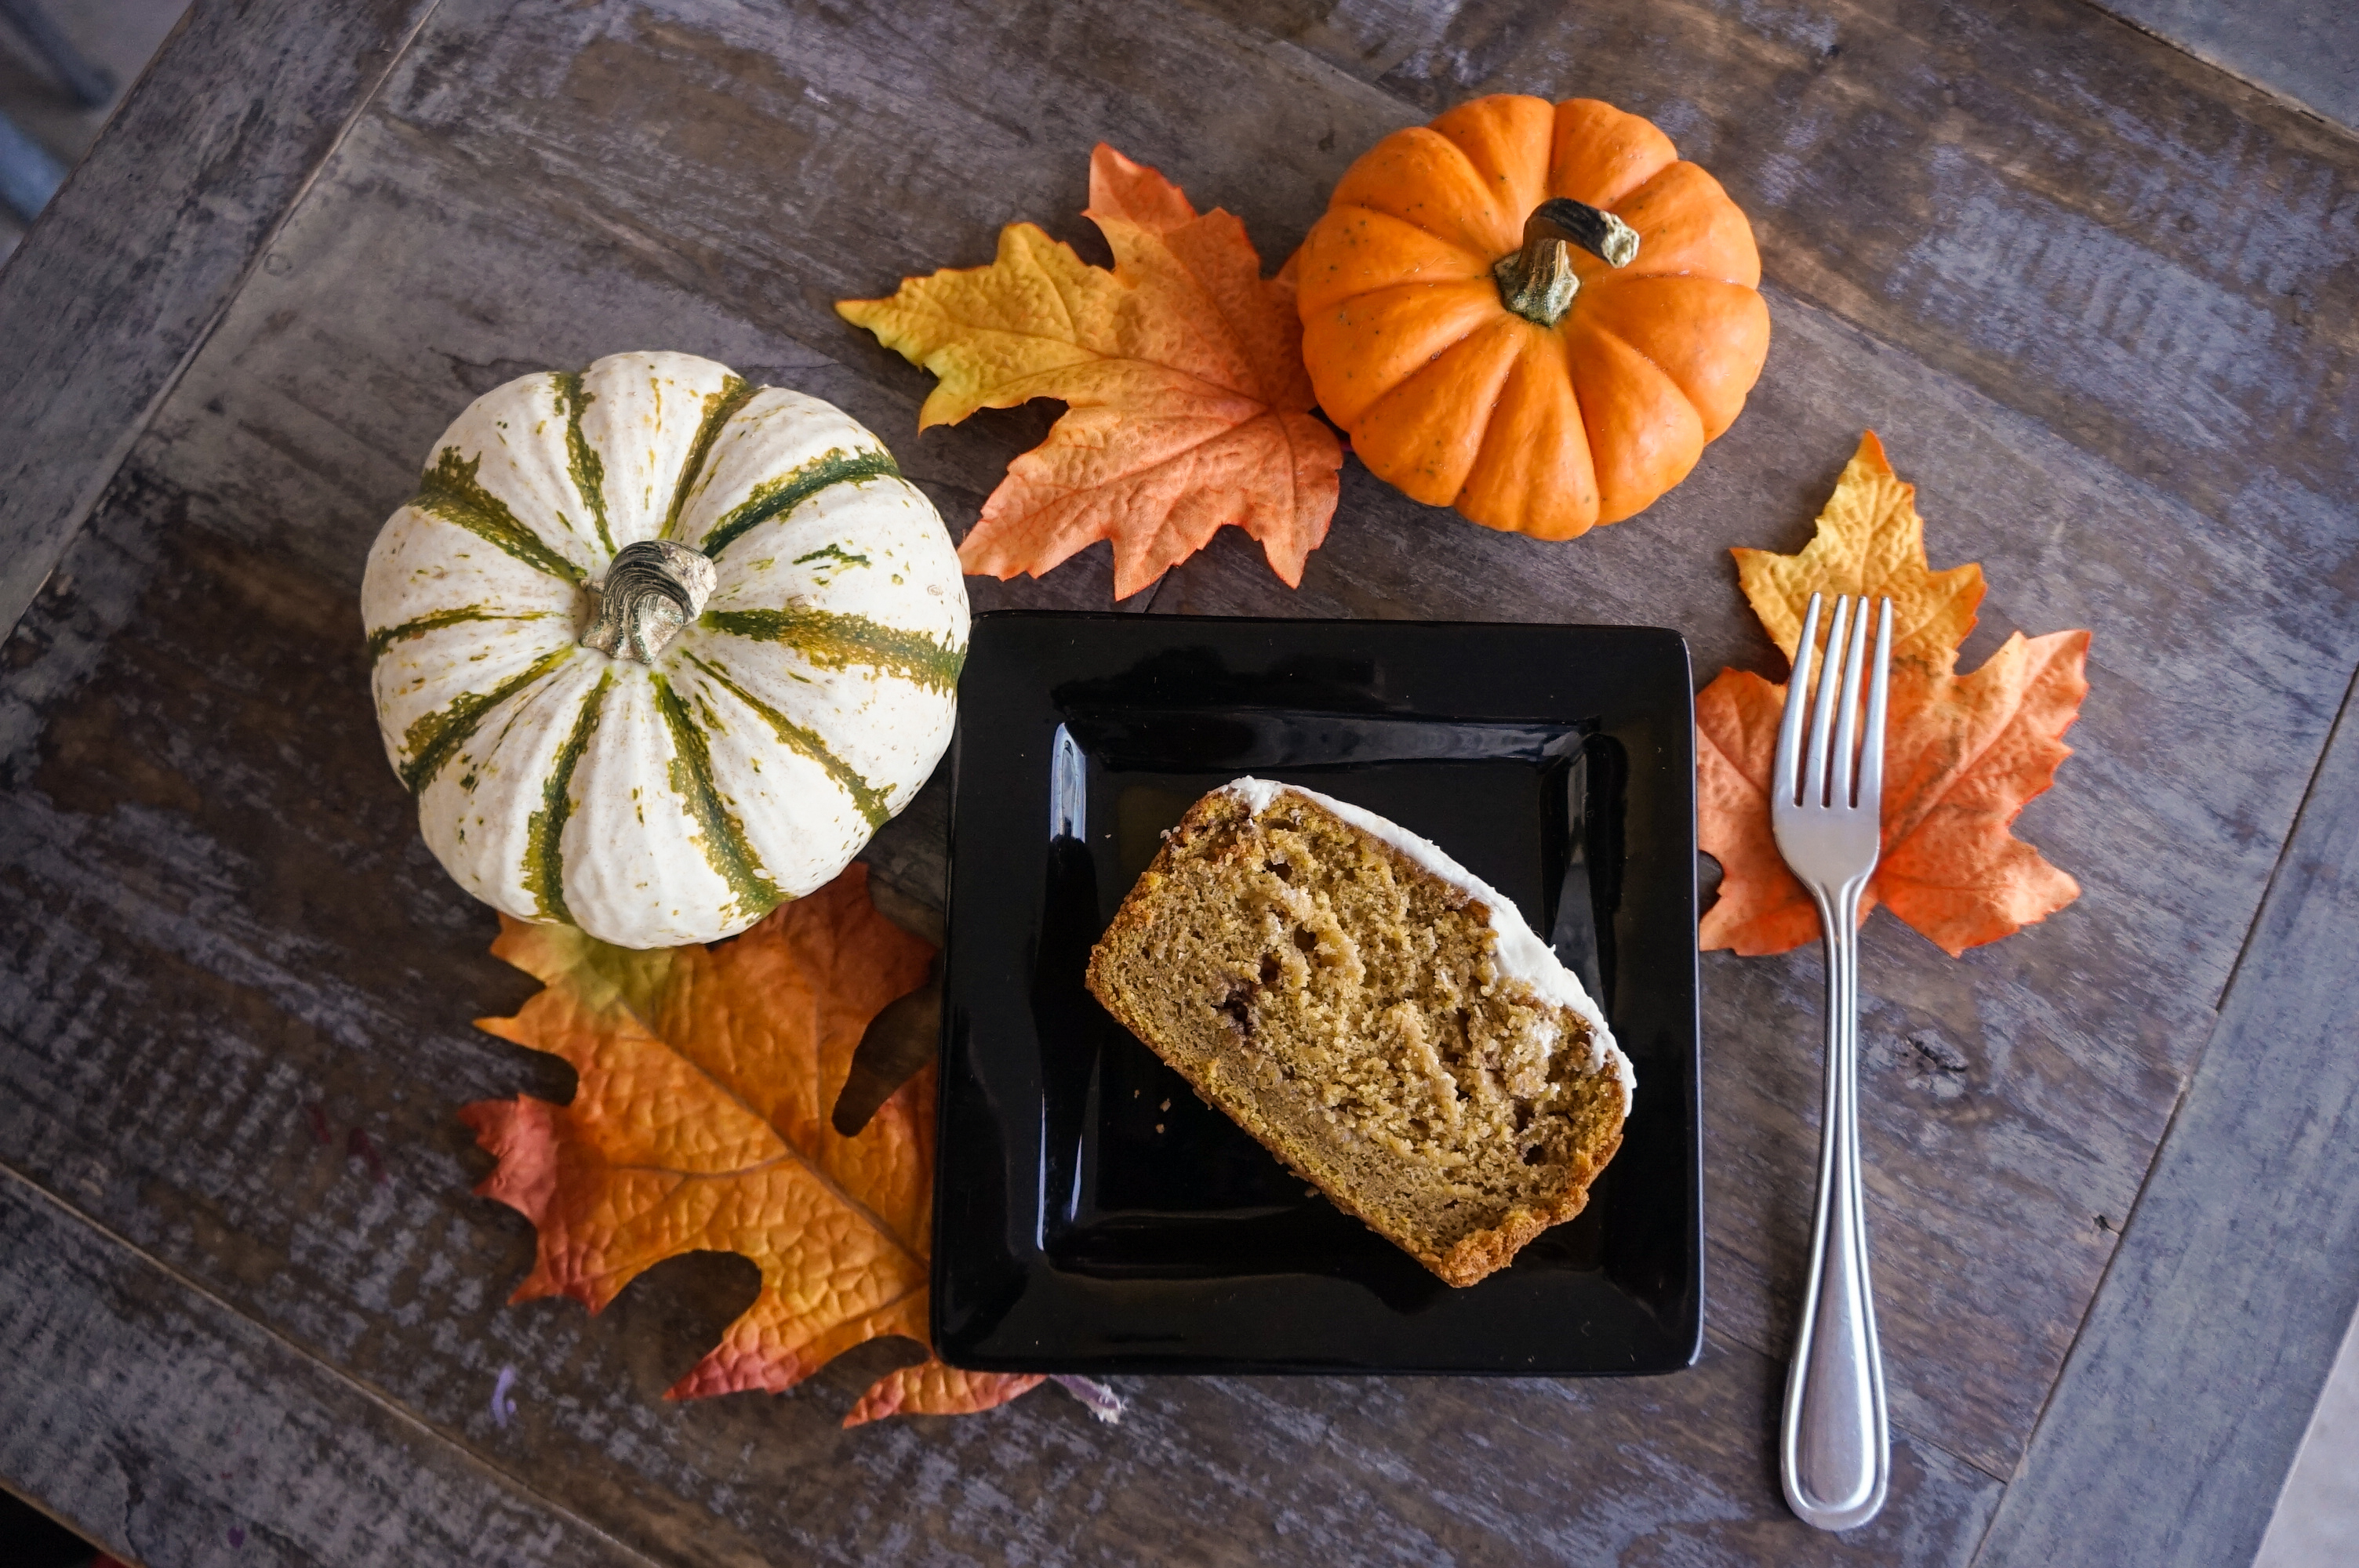 Pumpkin bread is perfect for Fall.